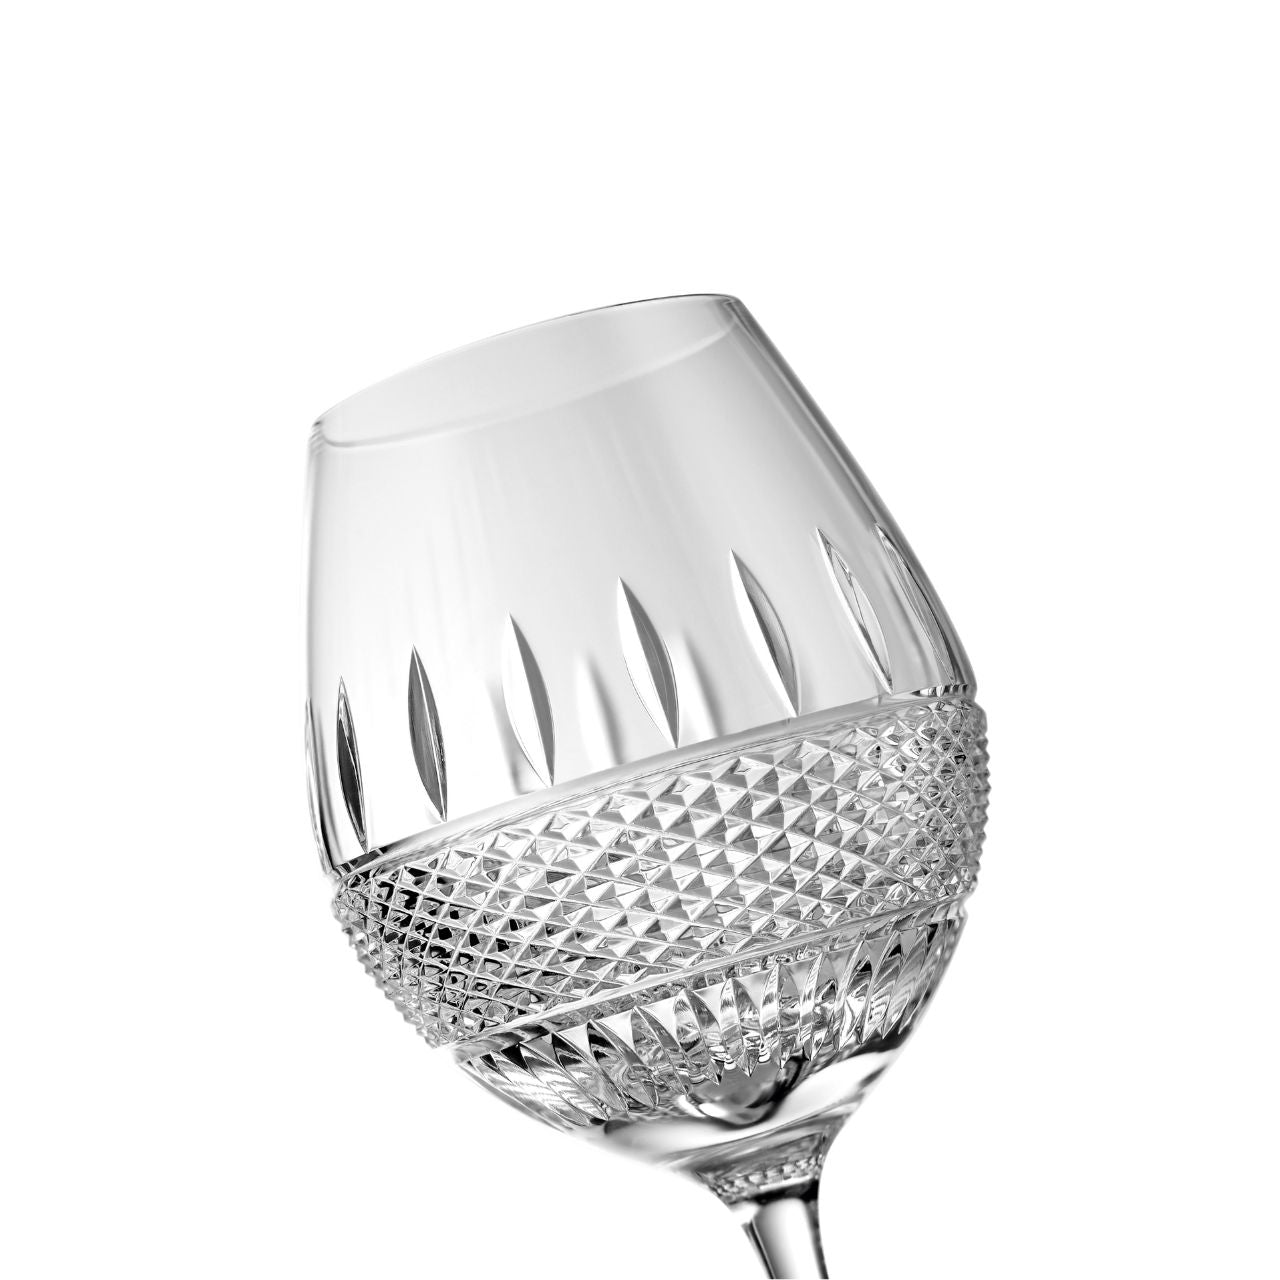 Waterford Crystal Irish Lace Crystal Red Wine Glasses, Set of 2